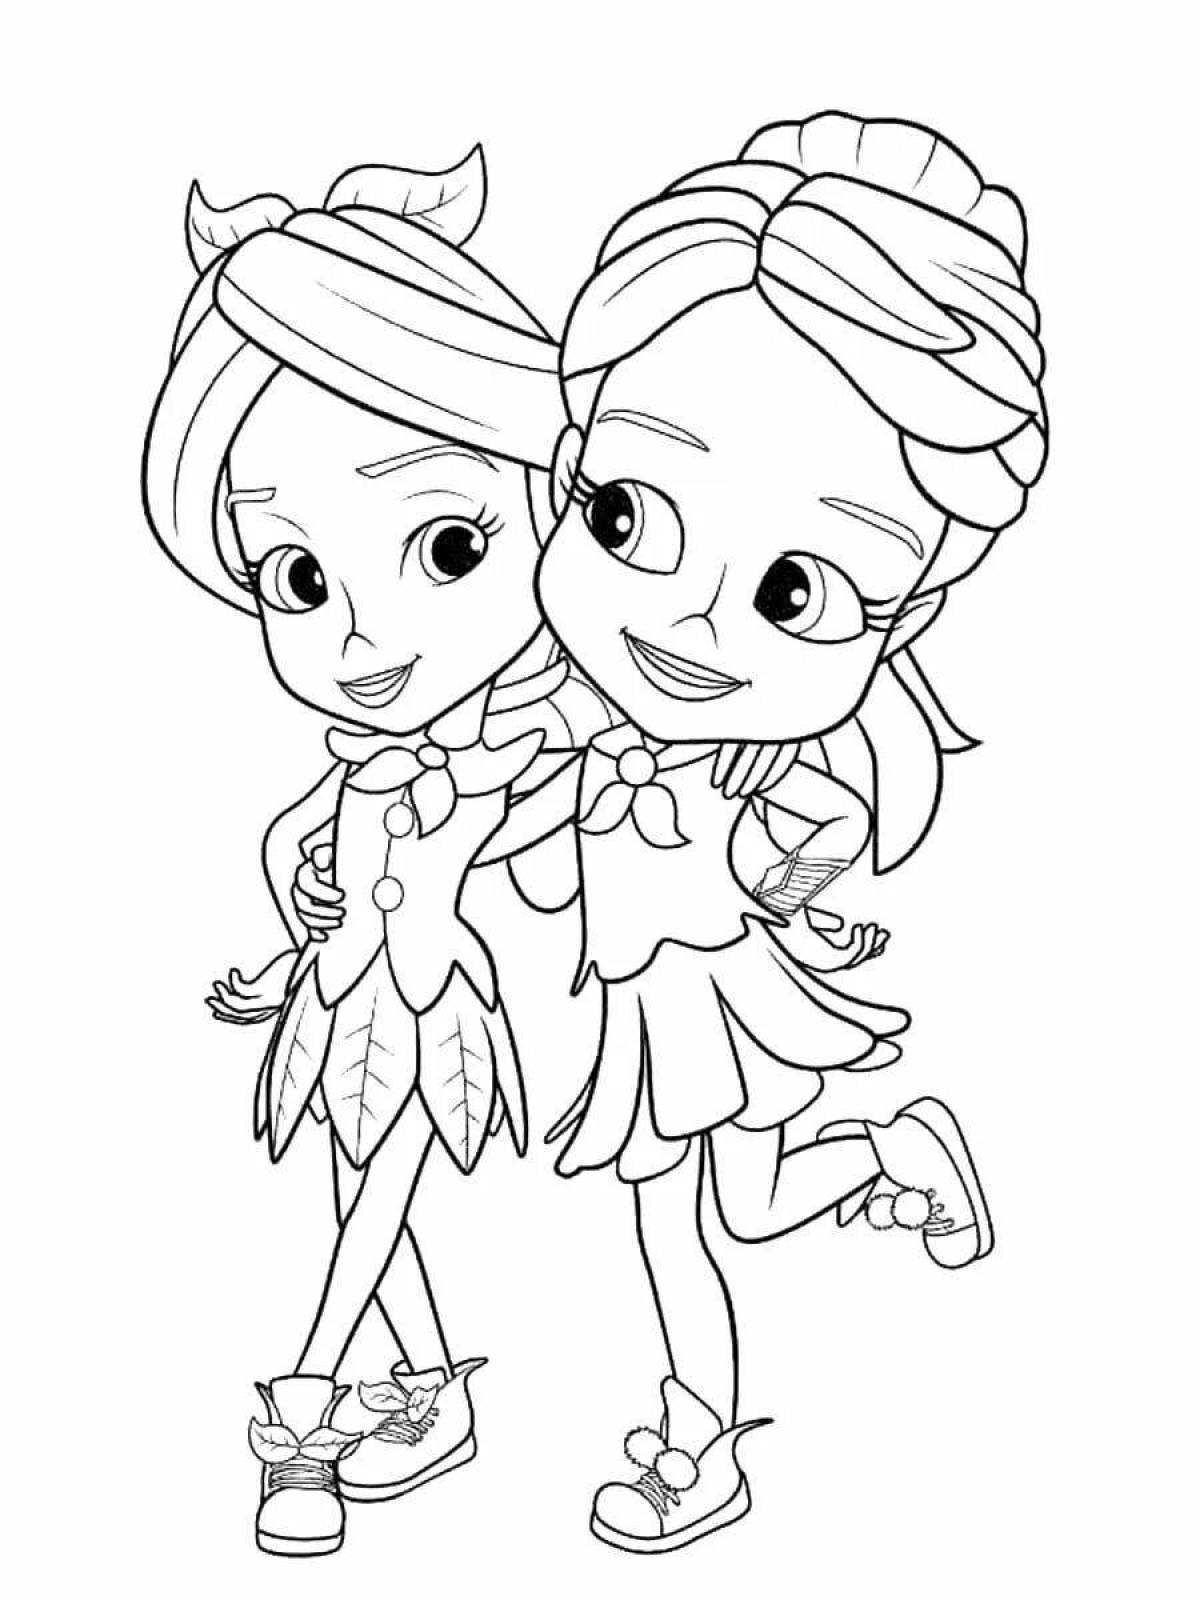 Amazing coloring pages for kids: Patrol 5-6 years old